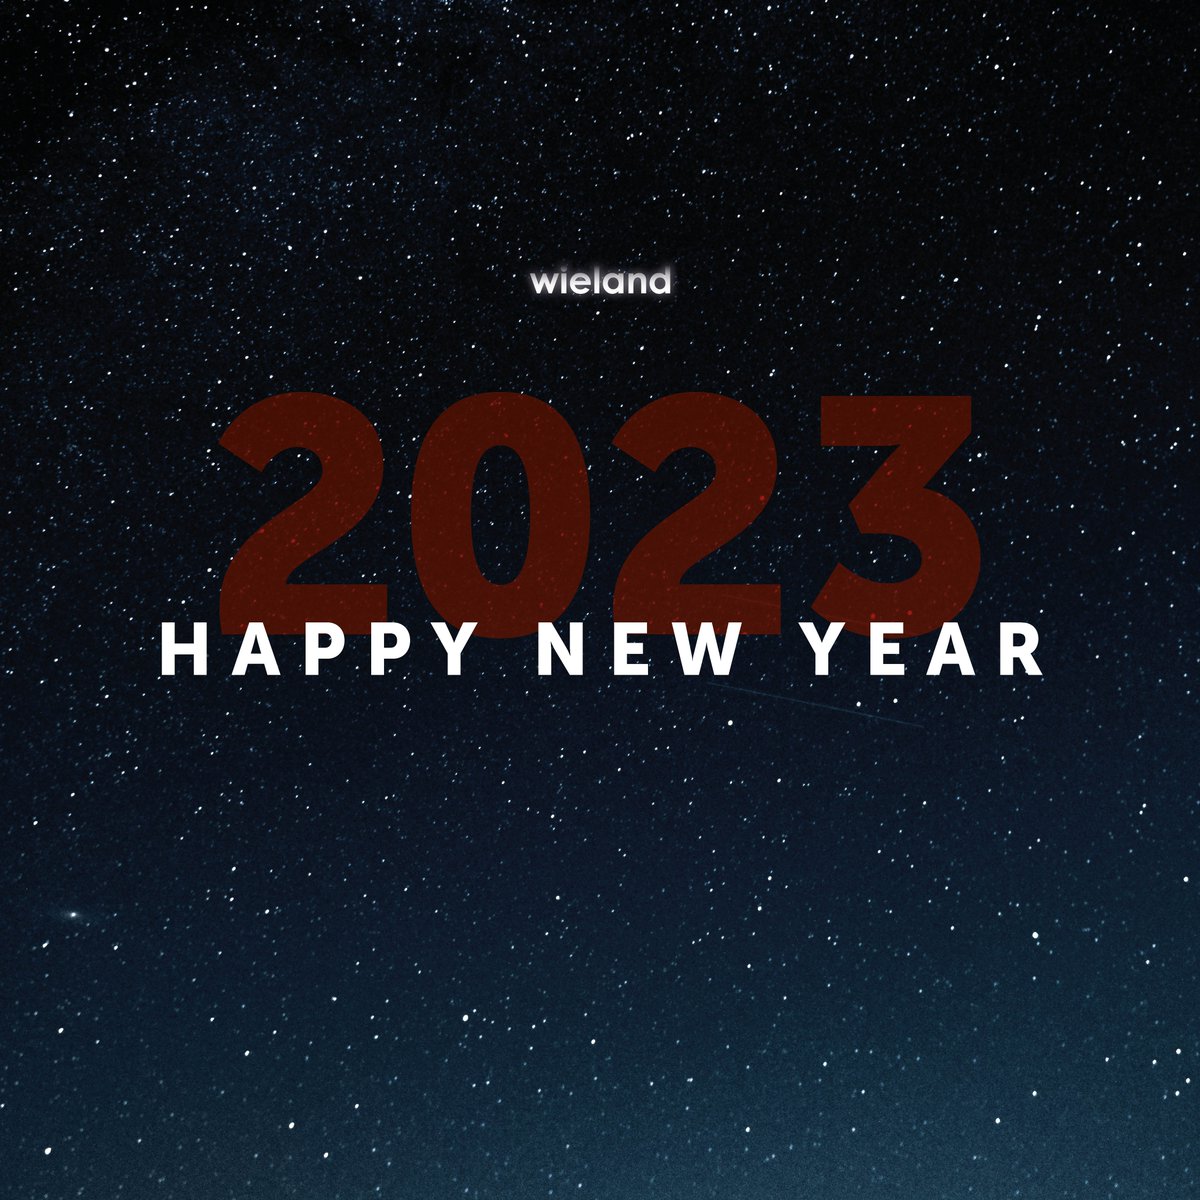 #HappyNewYear – may health, happiness, creativity and success be your companions in 2023! 
Continue following us in 2023 and stay up-to-date with the great projects Wieland has planned. 
#Wieland #WielandGroup #EmpoweringSuccess #EnablingSustainability #EnablingInnovation